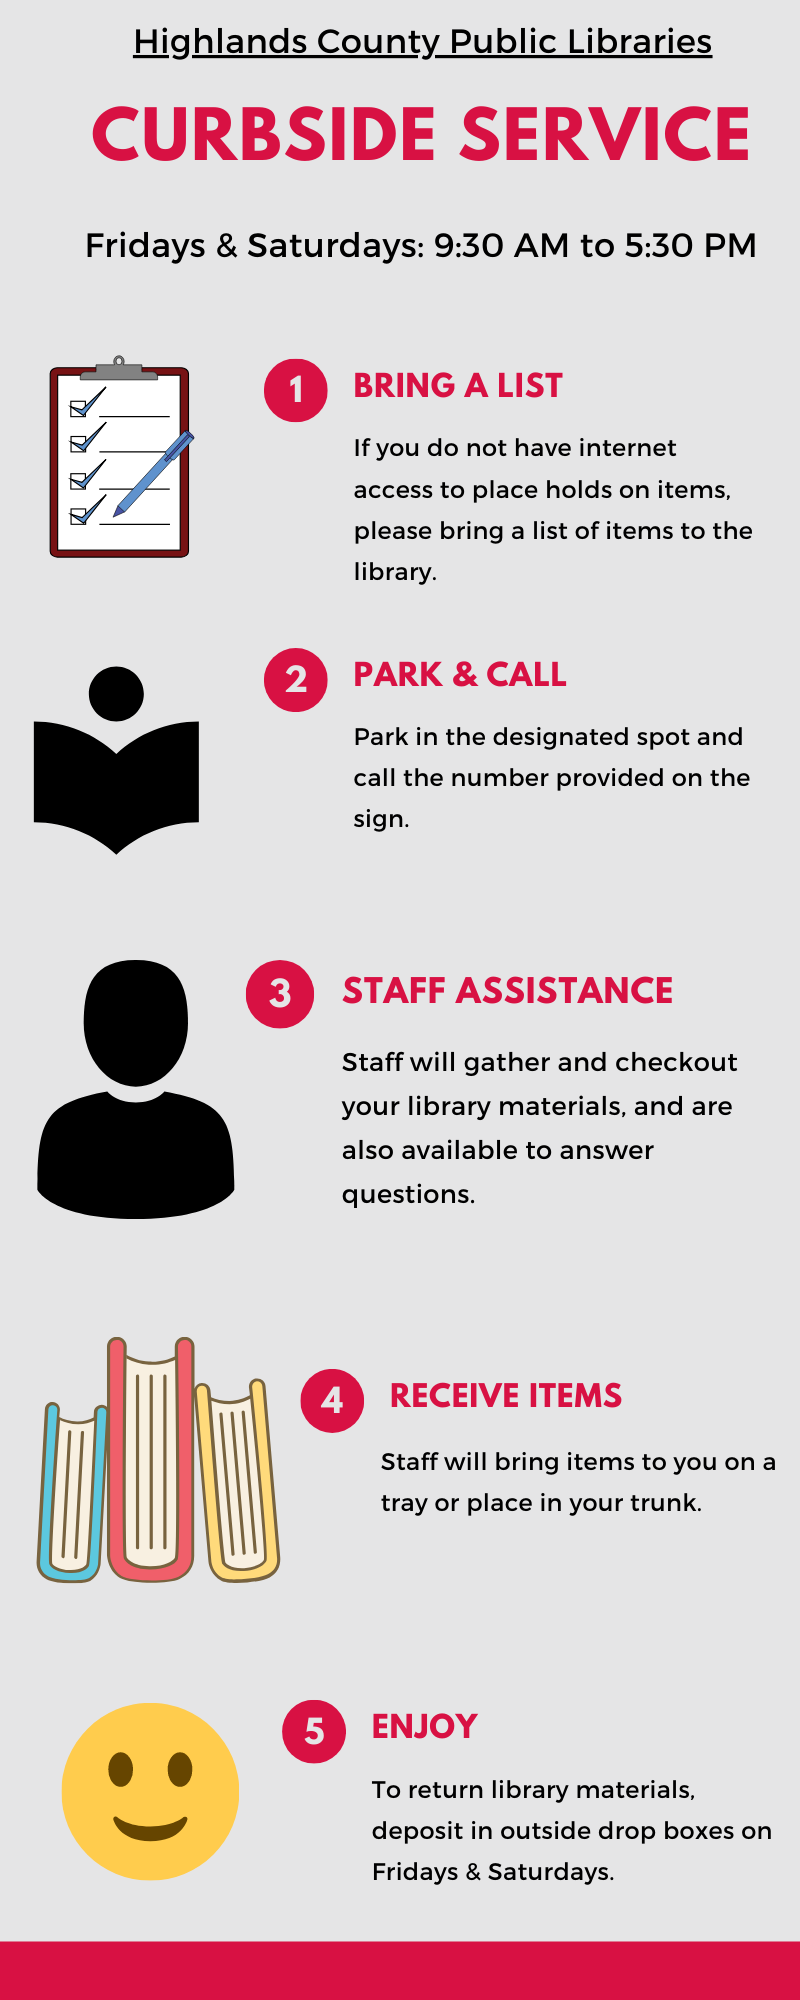 May 1, Highlands County Library System will be launching Curbside service for Avon Park Public Library, Lake Placid Memorial Library, and Sebring Public Library. Drive to your library, park in the designated parking space, and call the advertised phone number. Materials will be pulled while you wait, checked out, and delivered on a tray or placed in your vehicle's trunk. Service will be available Fridays and Saturdays, 9:30 AM to 5:30 PM. For questions before arriving, call 863-402-6716.